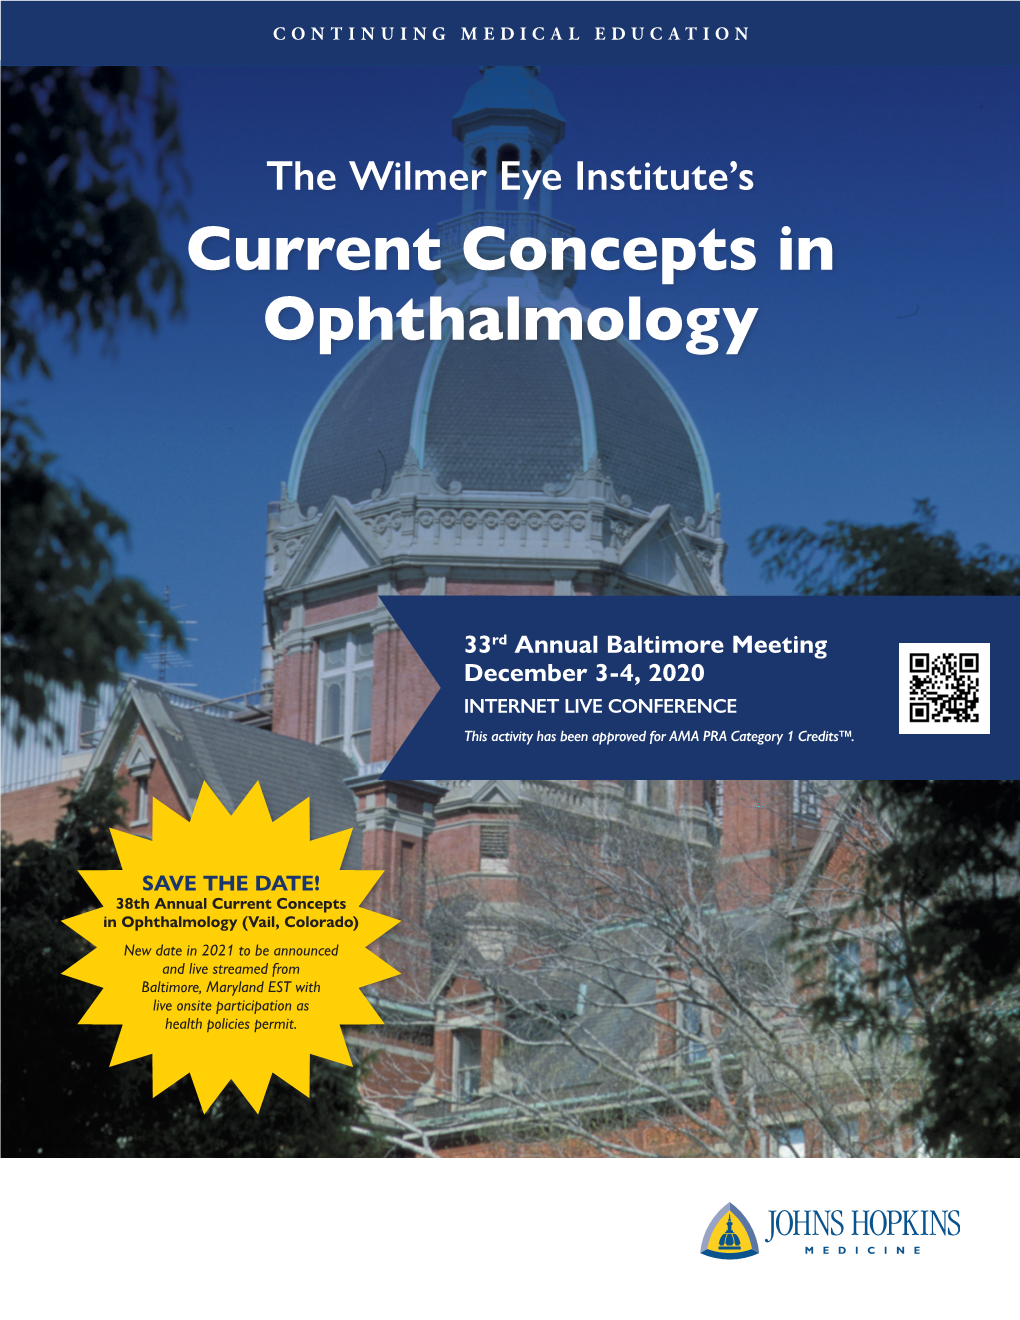 Current Concepts in Ophthalmology